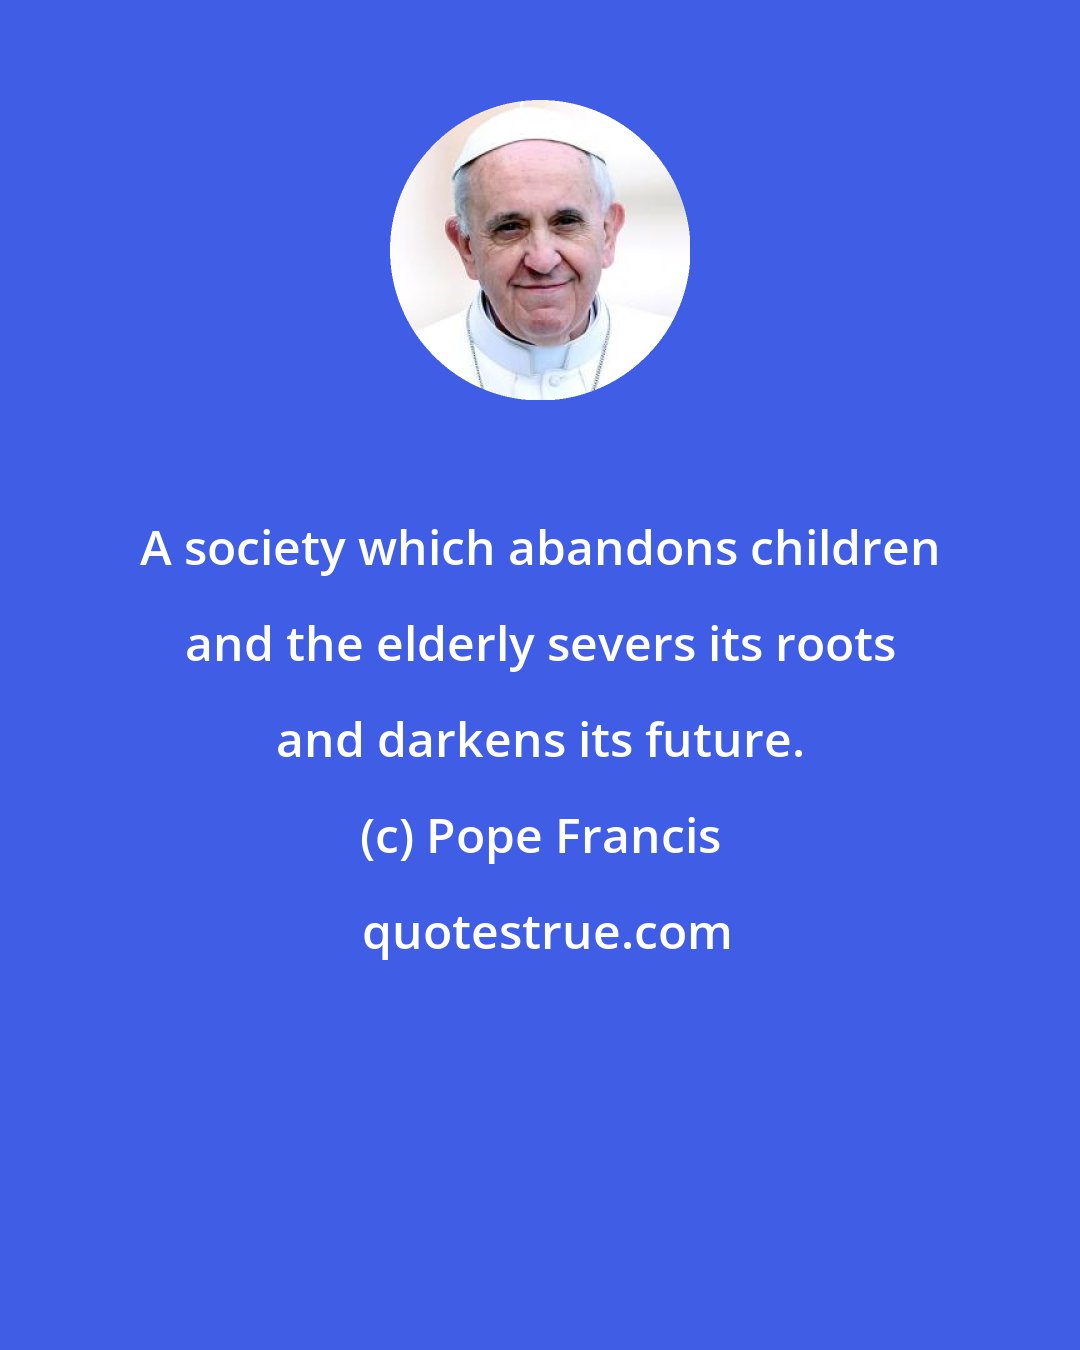 Pope Francis: A society which abandons children and the elderly severs its roots and darkens its future.